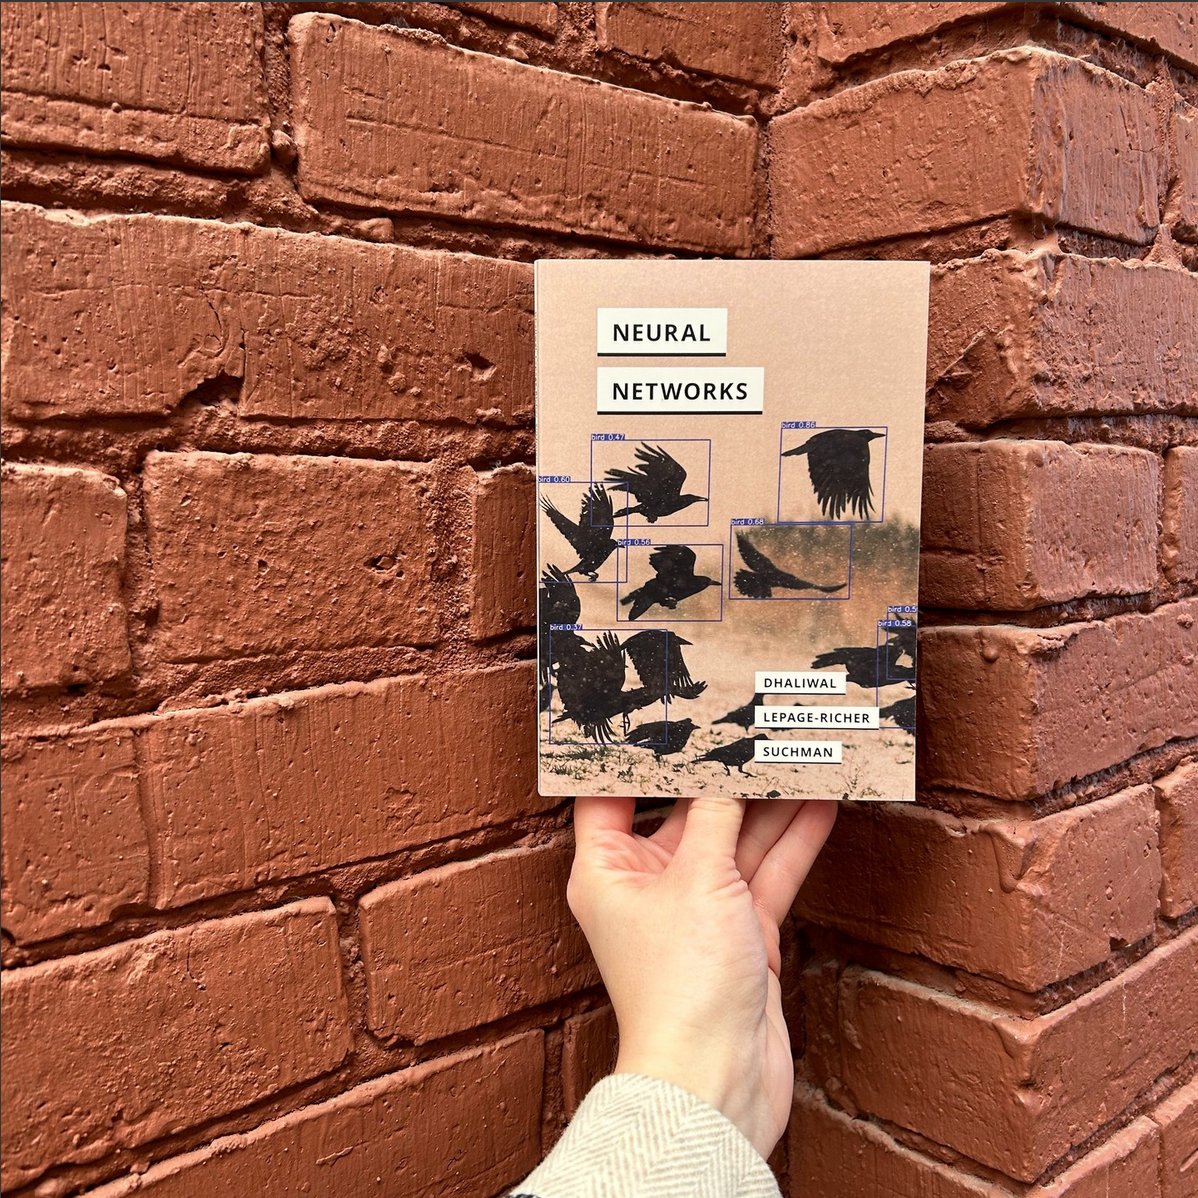 I have not yet physically seen it in actual paper, but I am led to believe that this 𝓪𝓮𝓼𝓽𝓱𝓮𝓽𝓲𝓬 image by @UMinnPress is real and not generated using neural networks. You can order a hard copy via upress.umn.edu/book-division/… today or wait a hot second for a downloadable PDF!